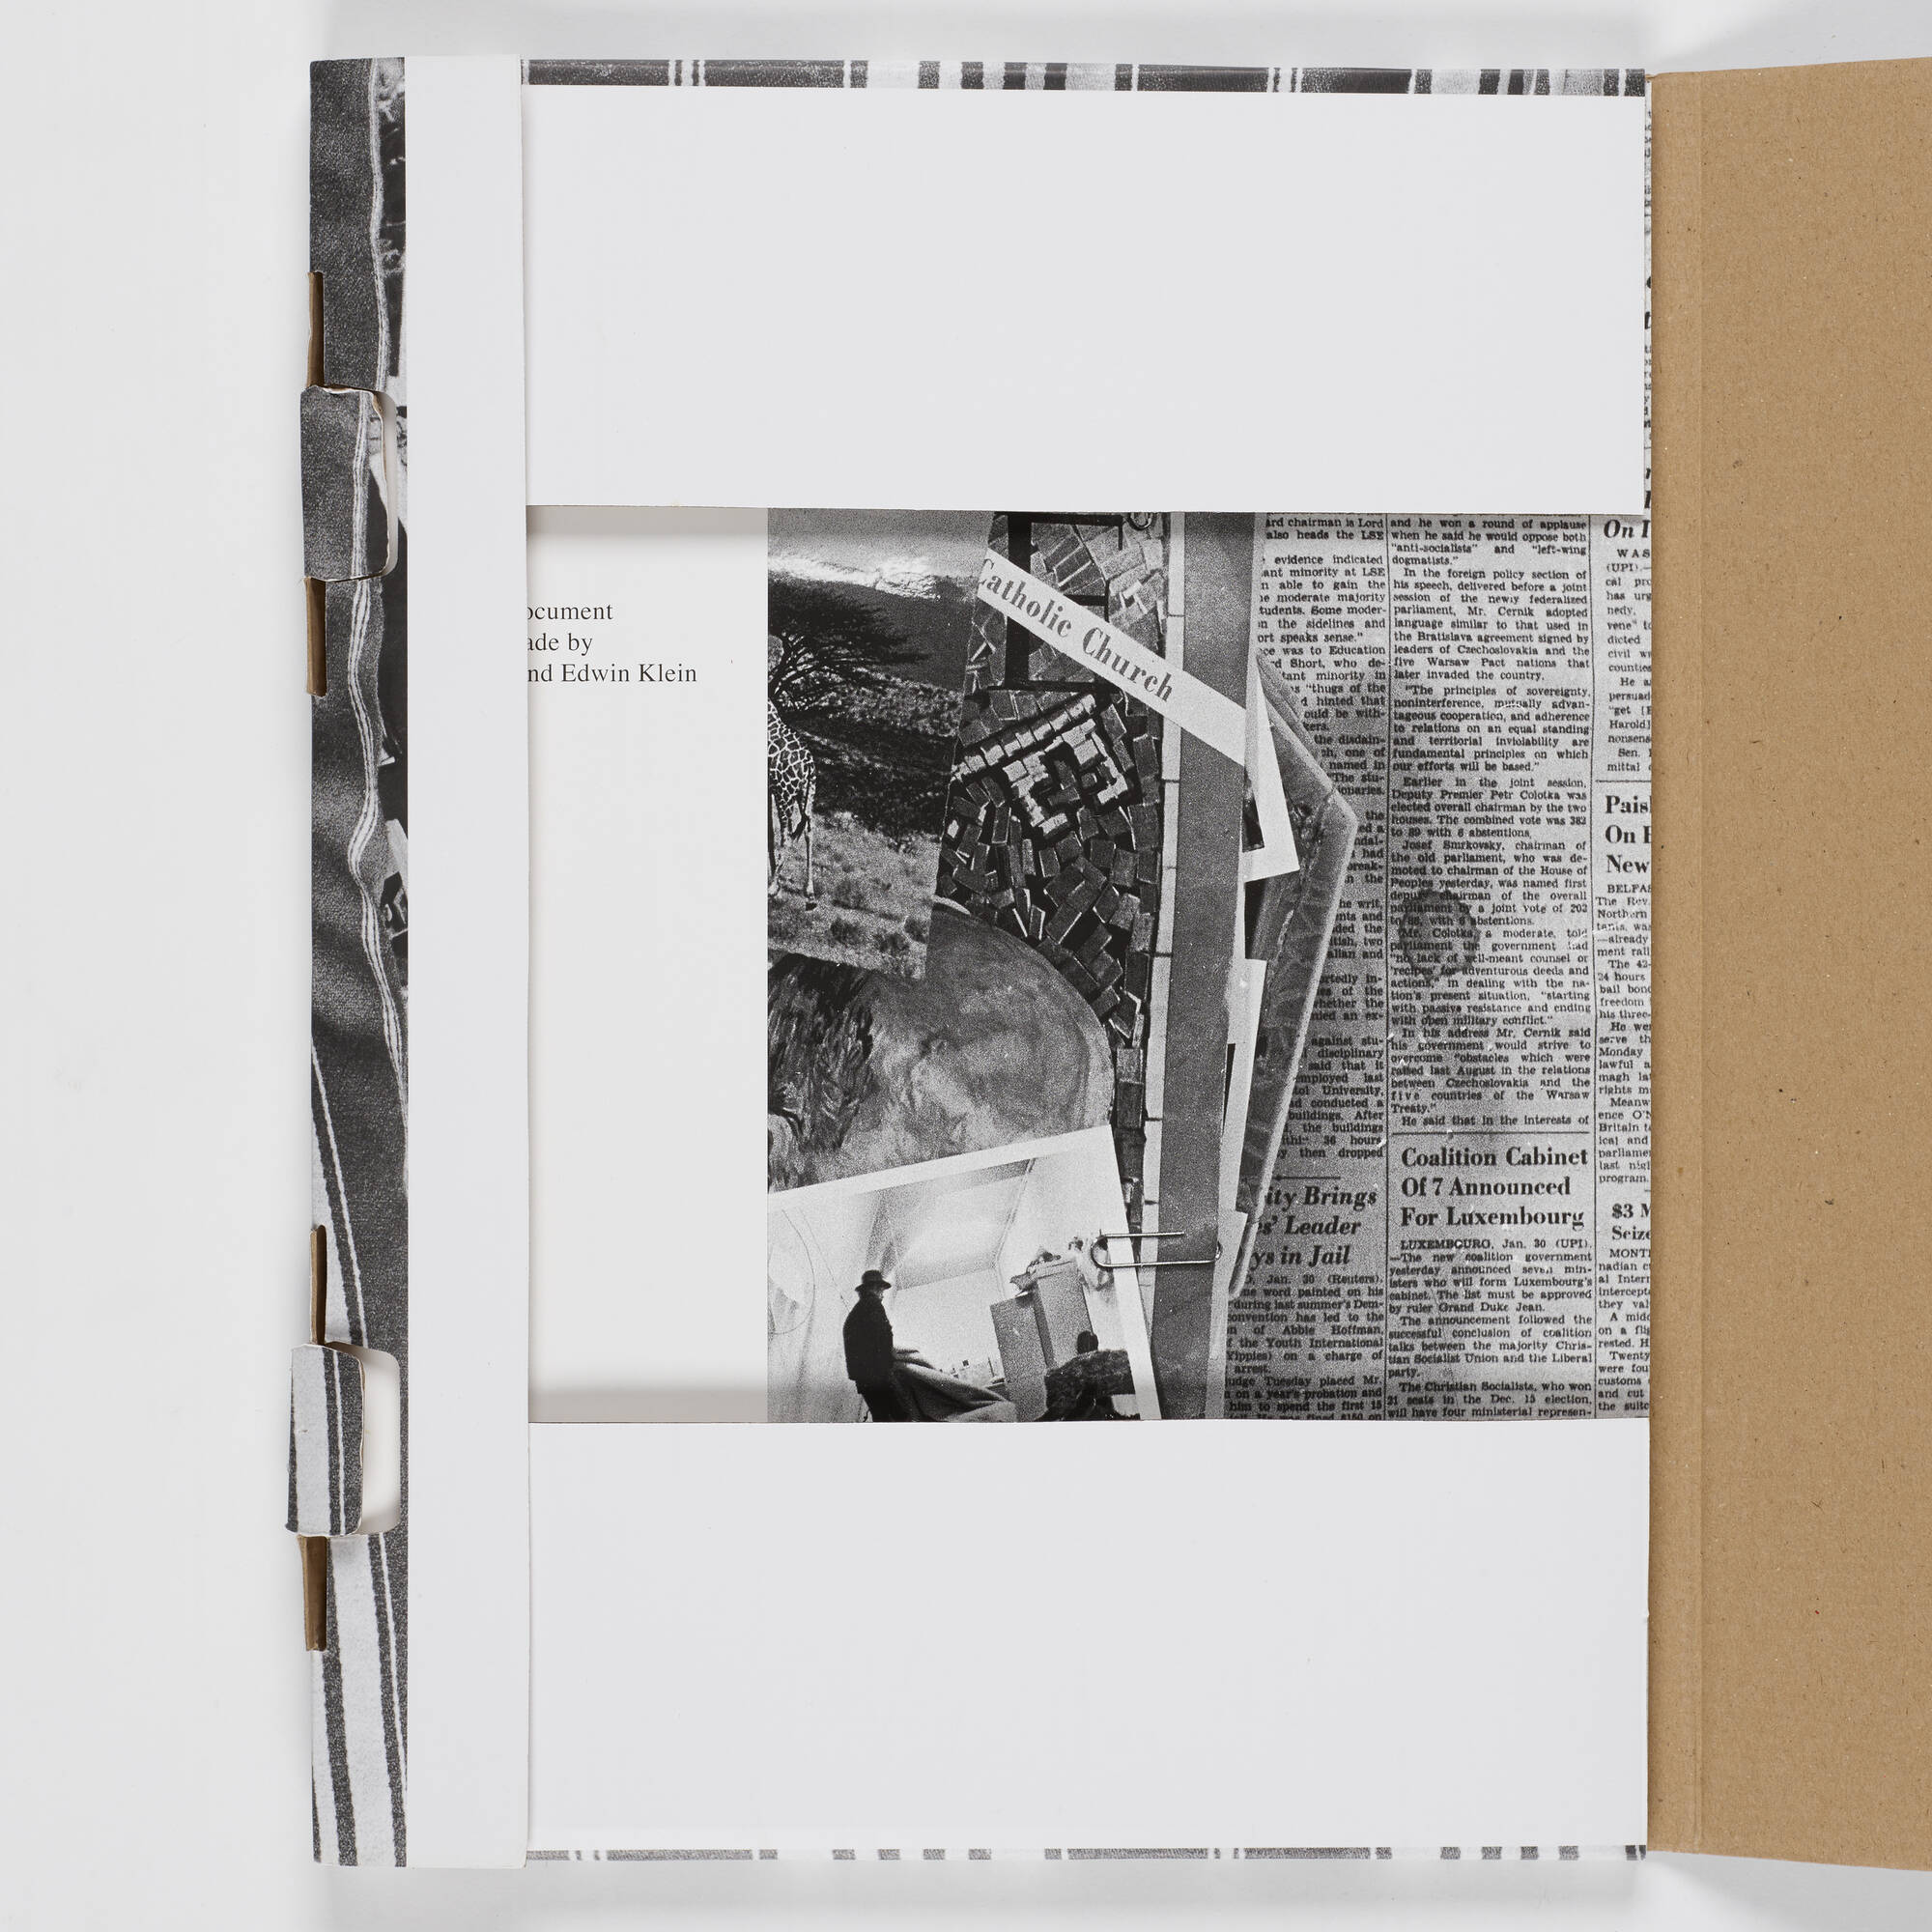 281: PAUL THEK AND EDWIN KLEIN, Artist book and documents, two 